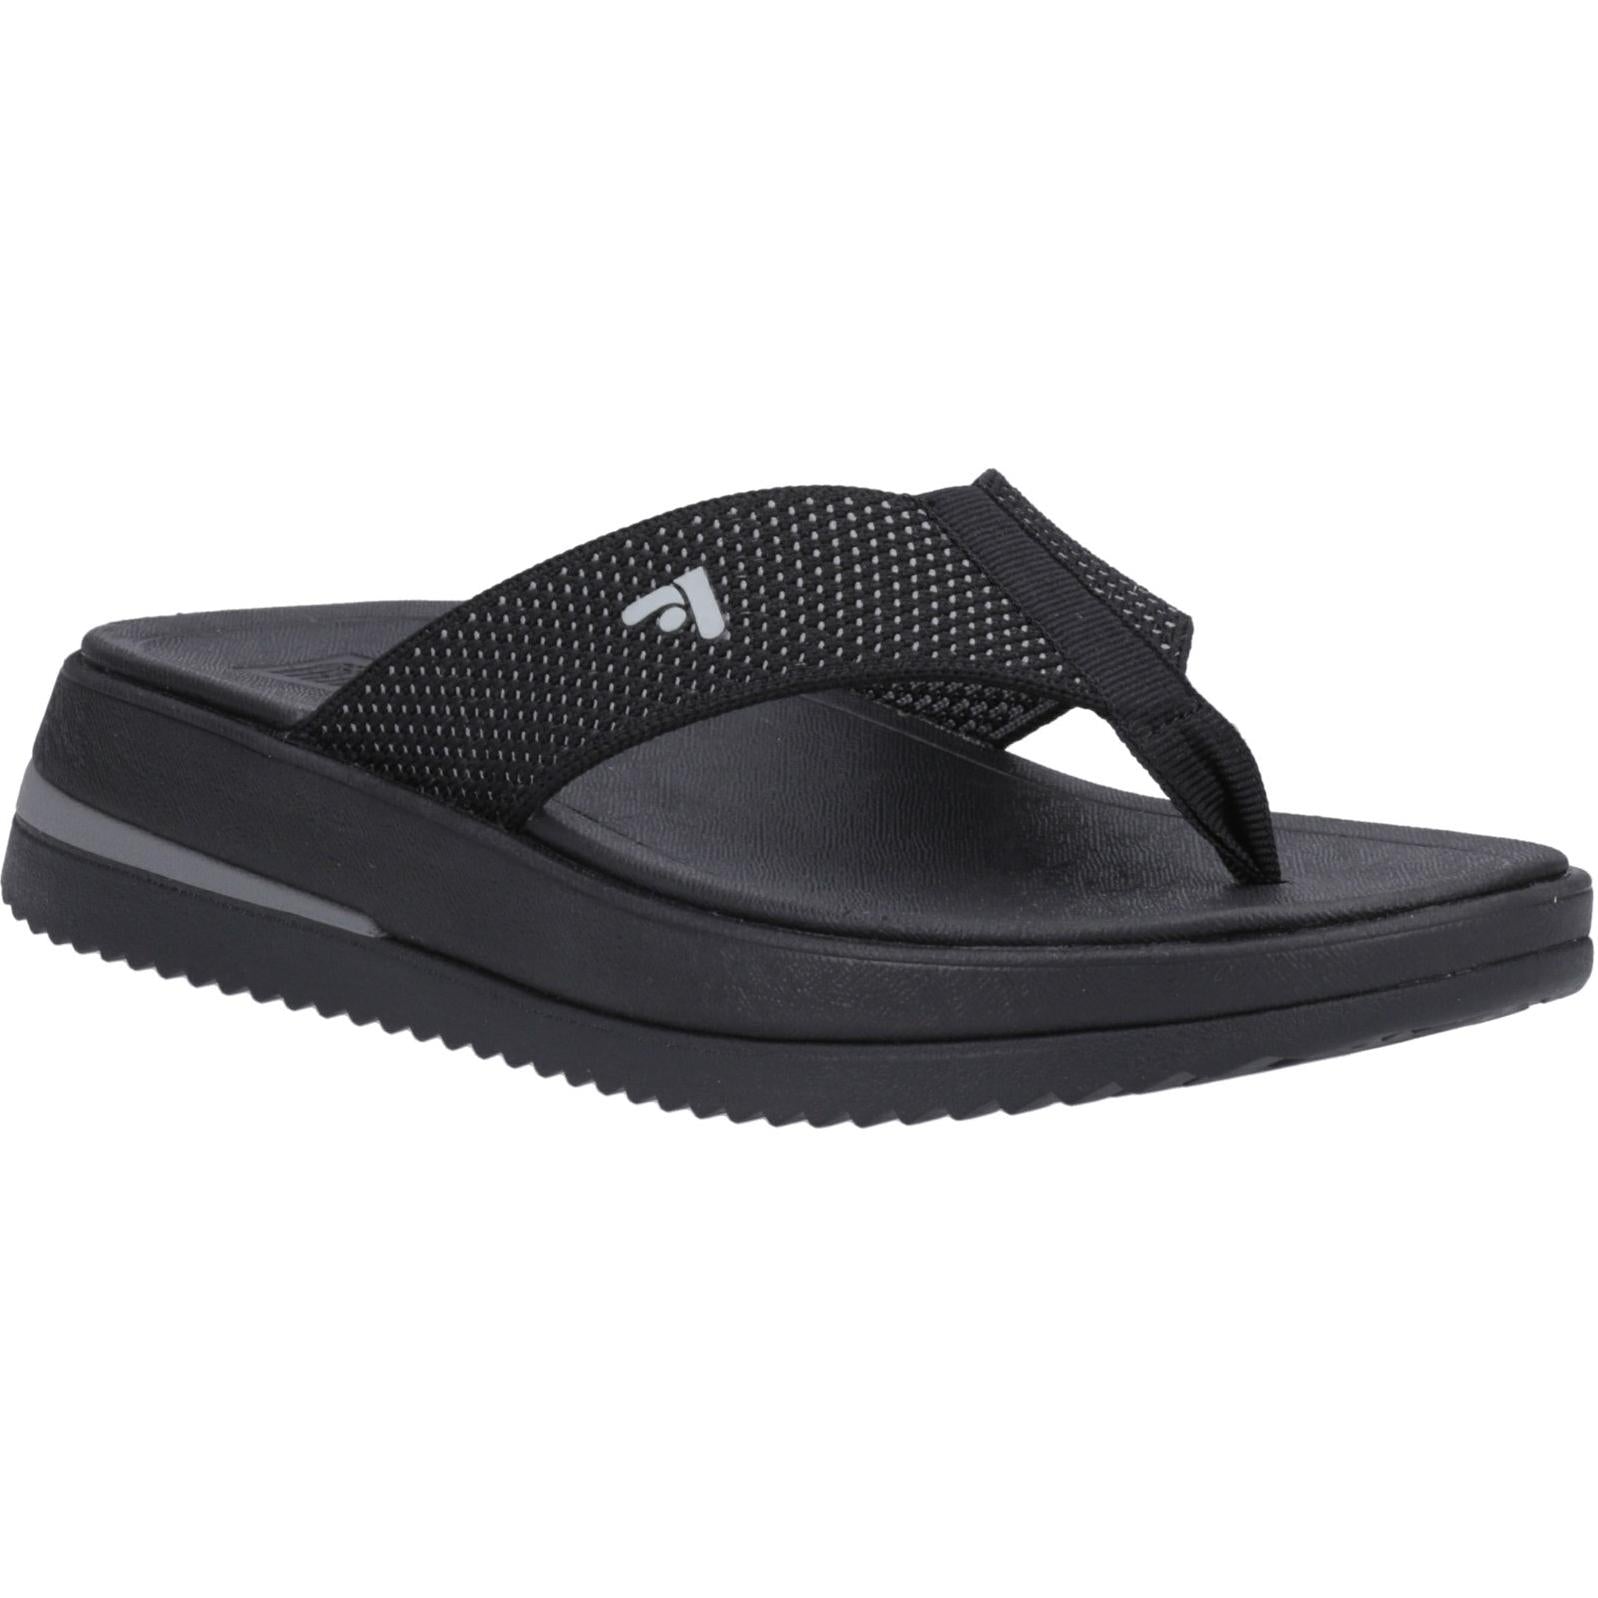 Fitflop Surff Two-tone Toe Post Sandals